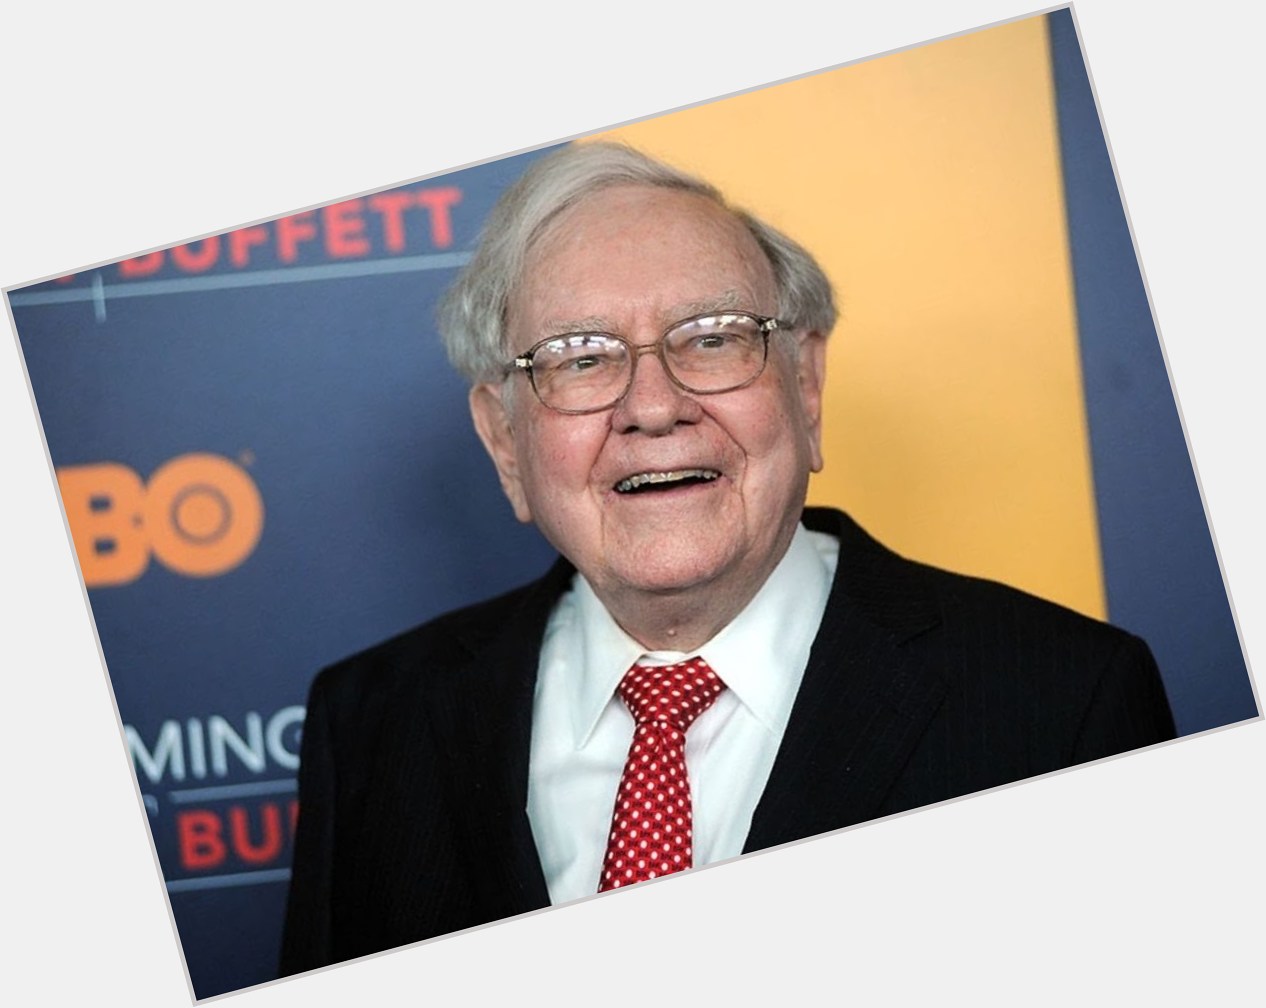  I don t need a stock price to tell me what I already know about value. - 
Warren Buffett

Happy Birthday WB 